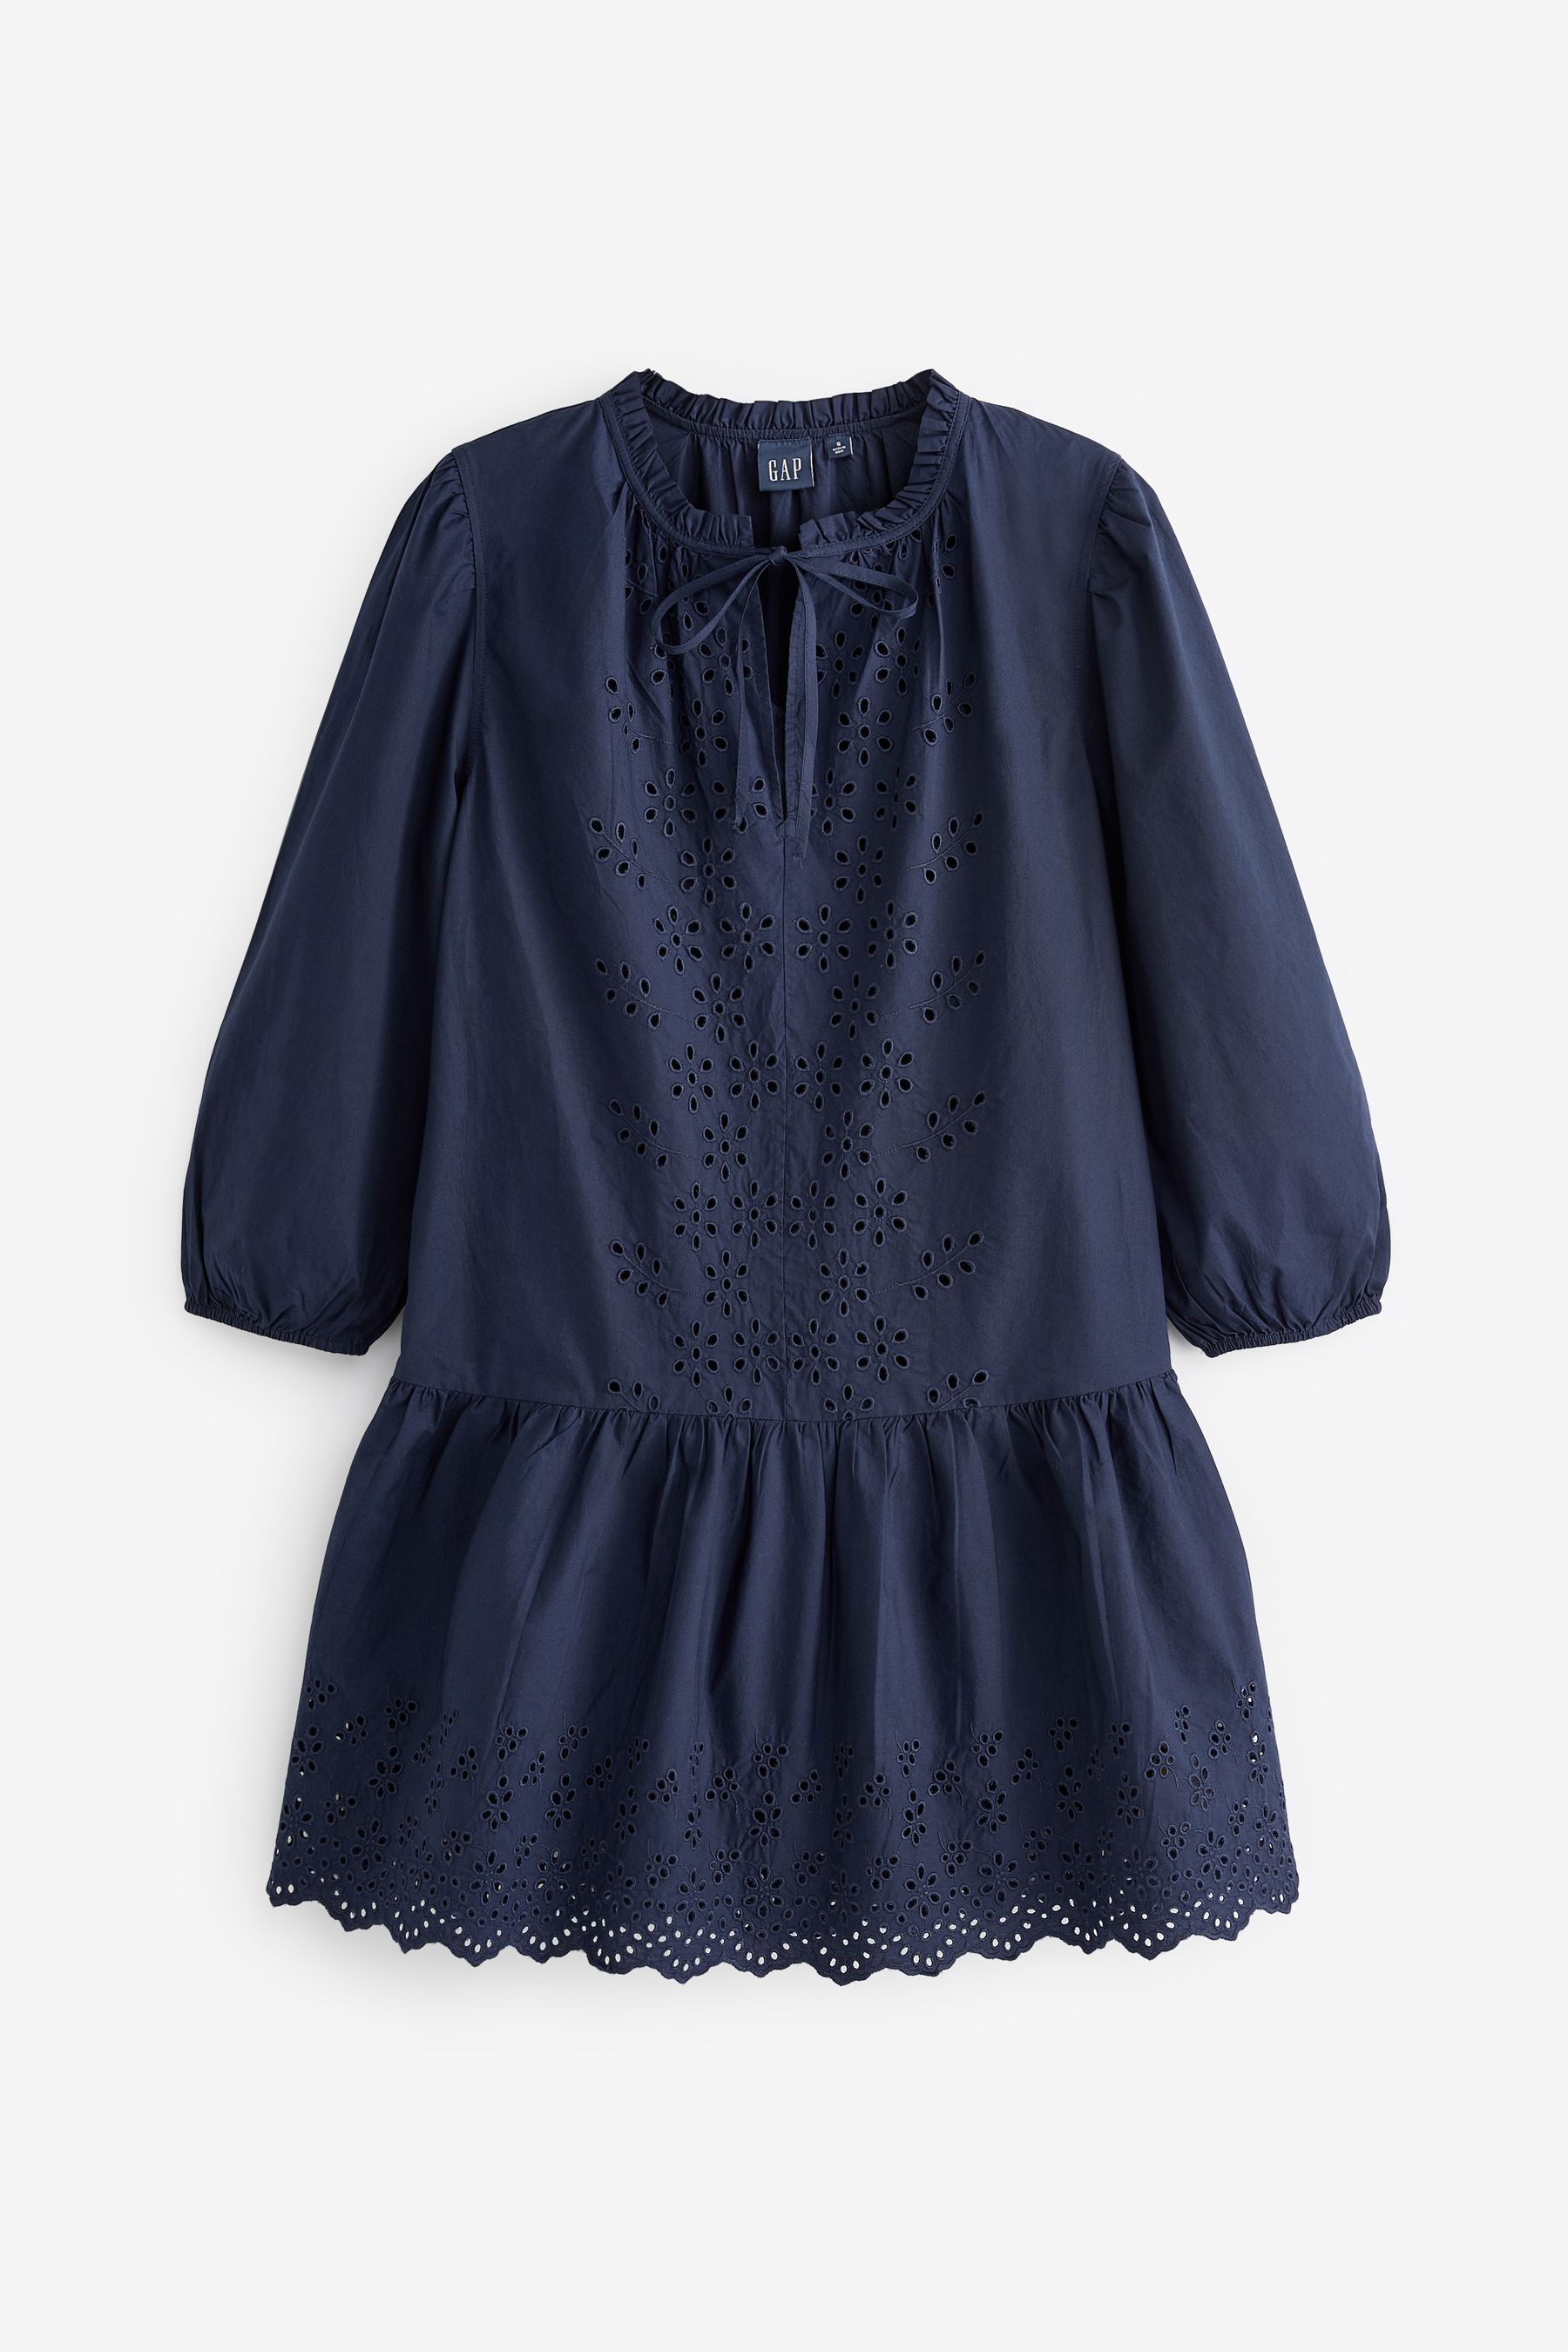 Buy Gap Broderie Round Neck Long Puff Sleeve Mini Dress from the Gap ...